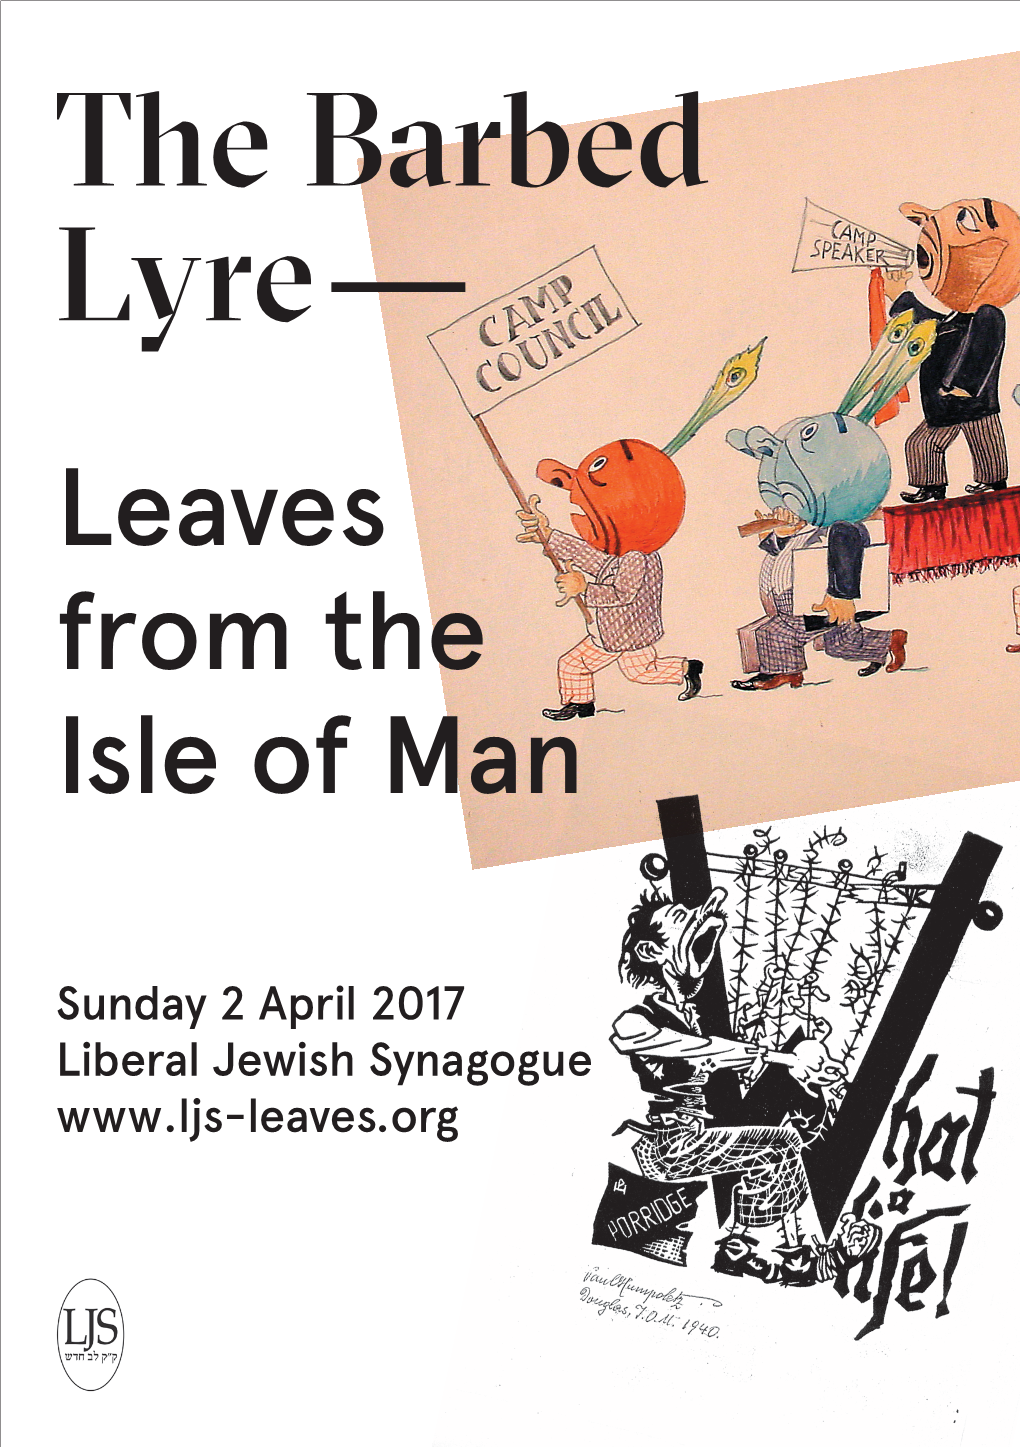 The Barbed Lyre — Leaves from the Isle of Man